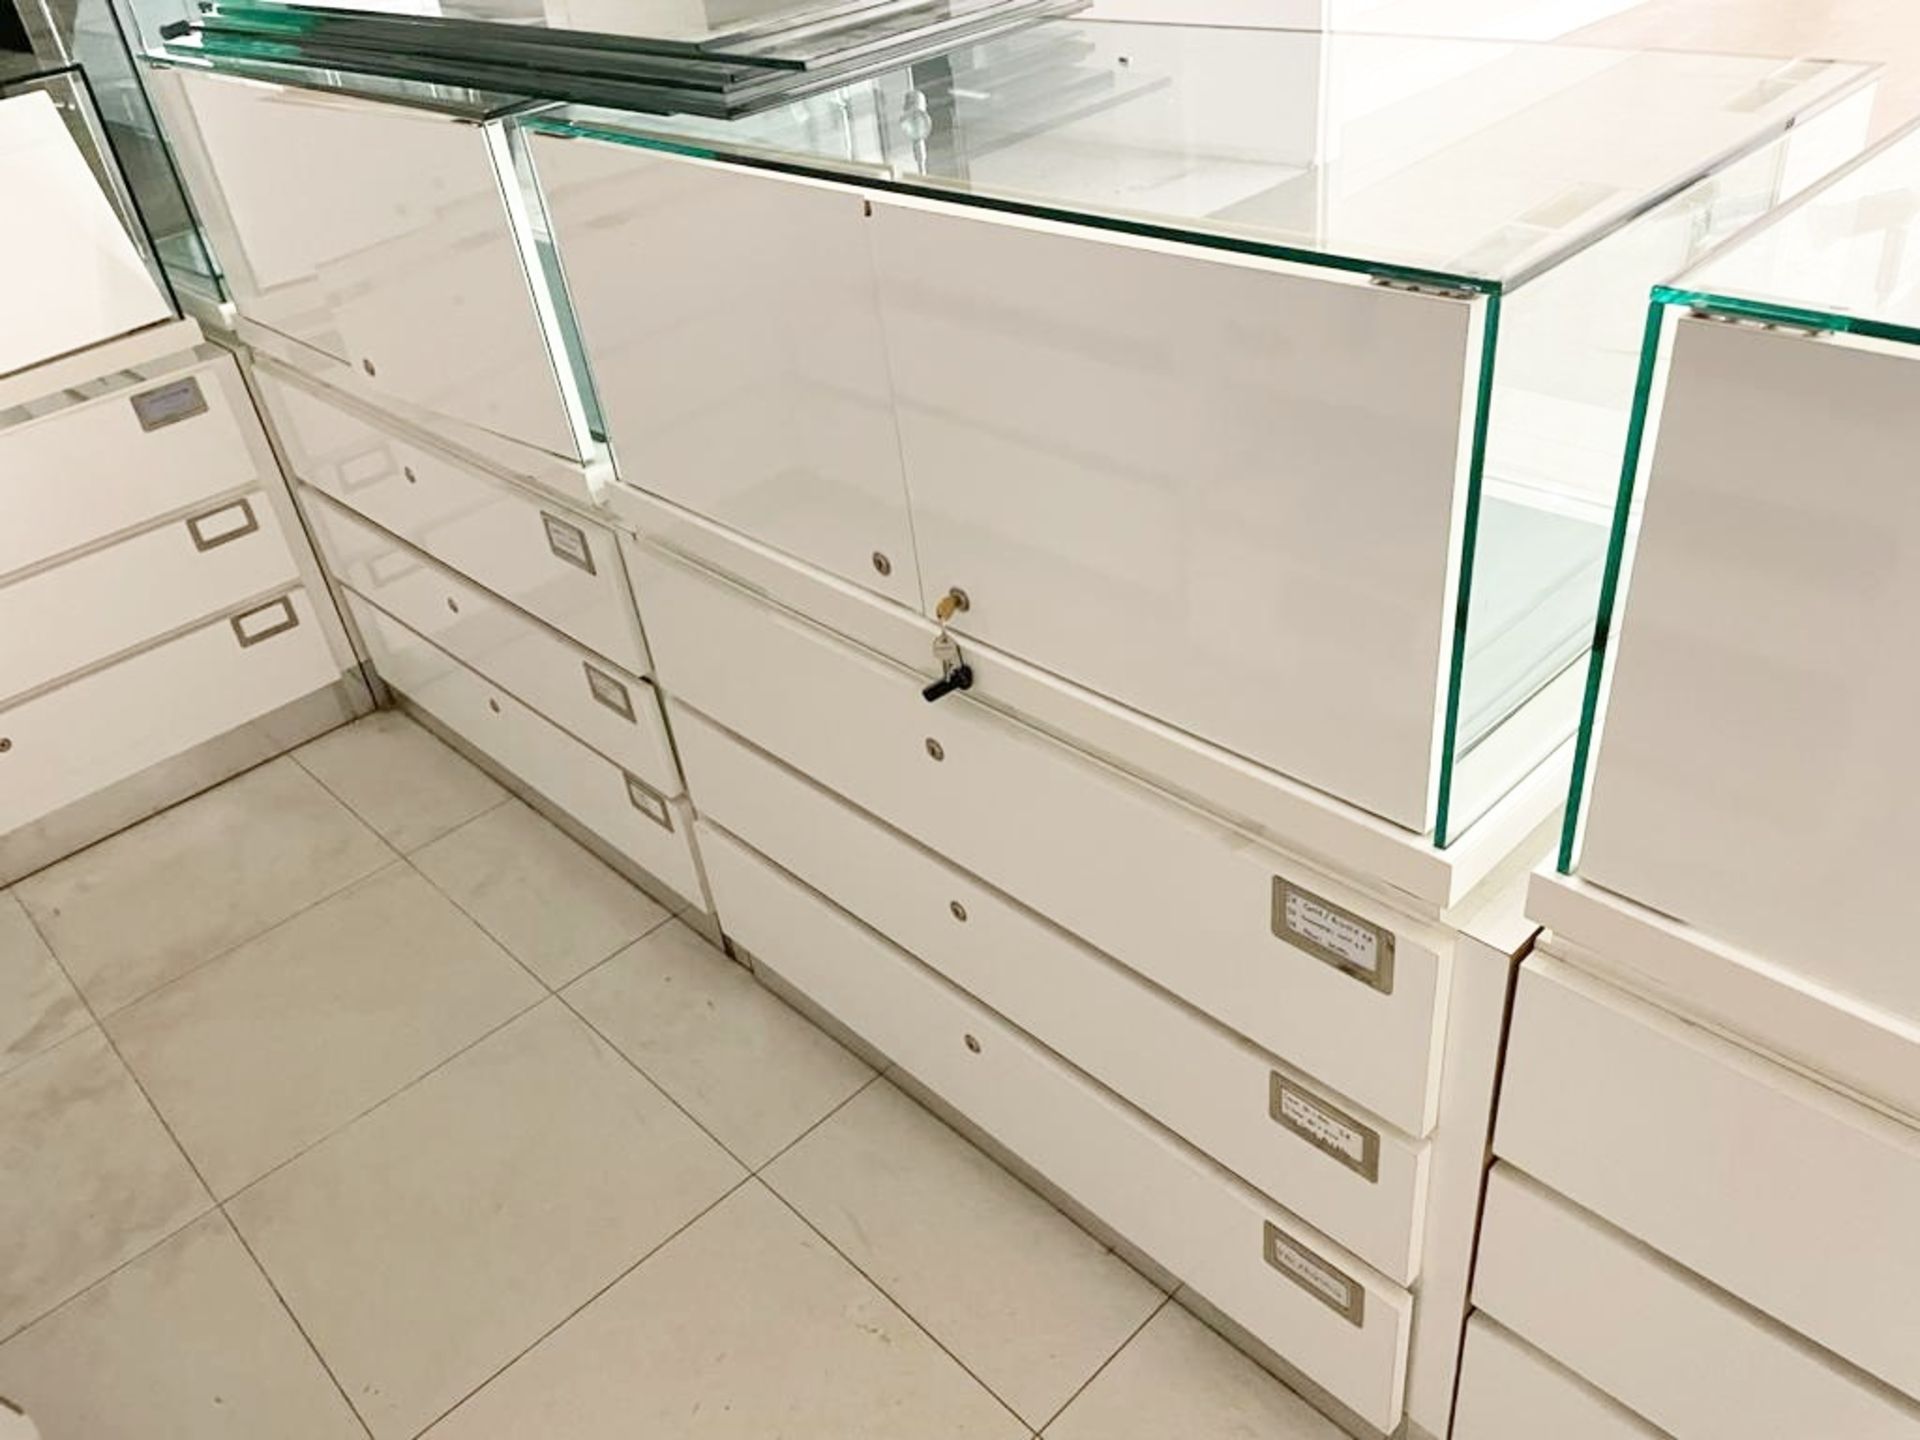 8 x Retail Glass Display Case Counter Cabinets - Features White Gloss Finish, Safety Glass, Internal - Image 7 of 13